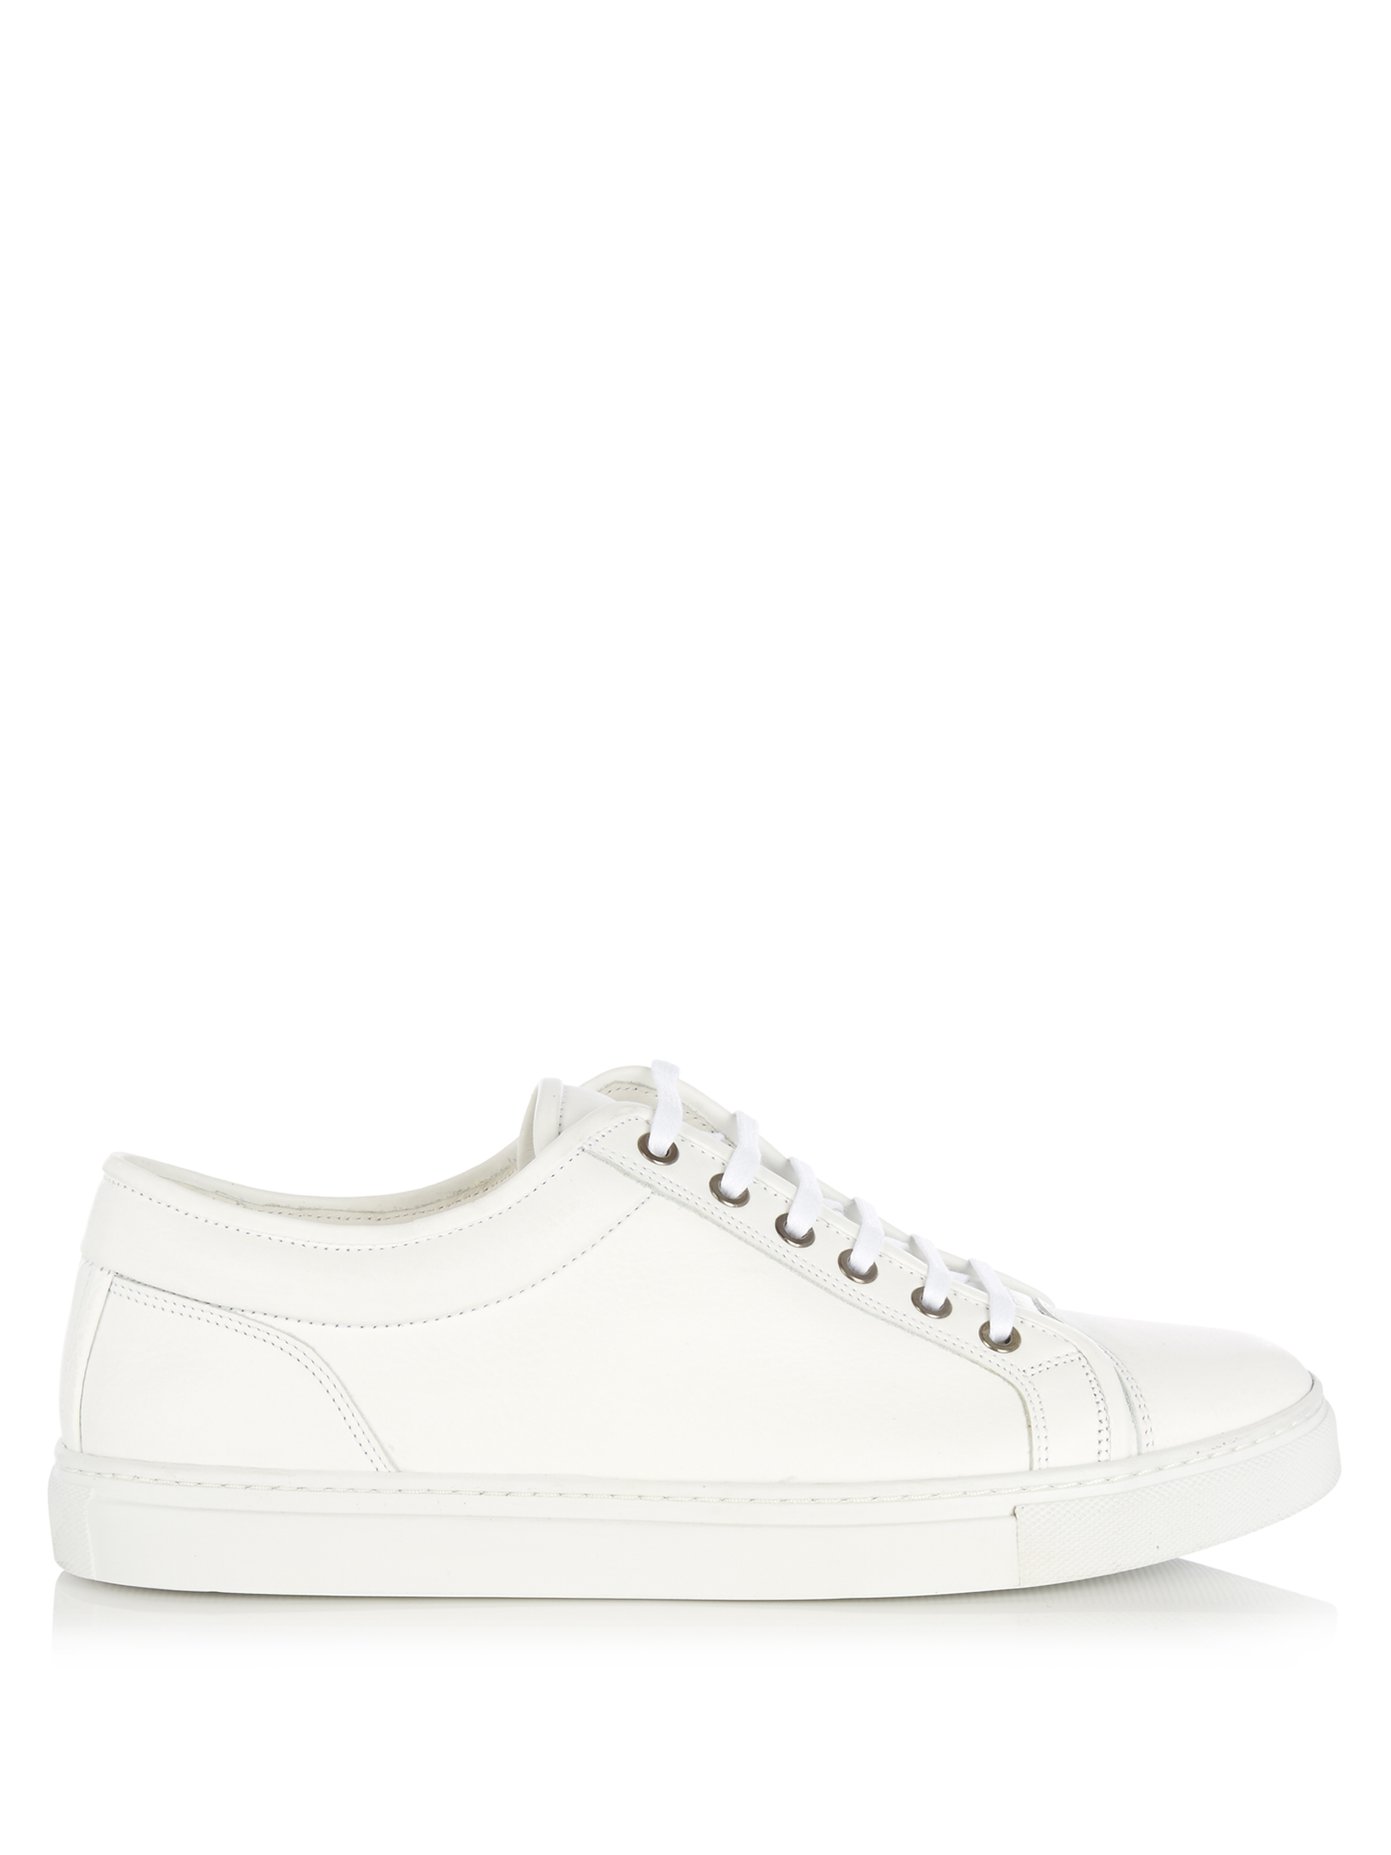 Low 1 leather trainers | ETQ Amsterdam 